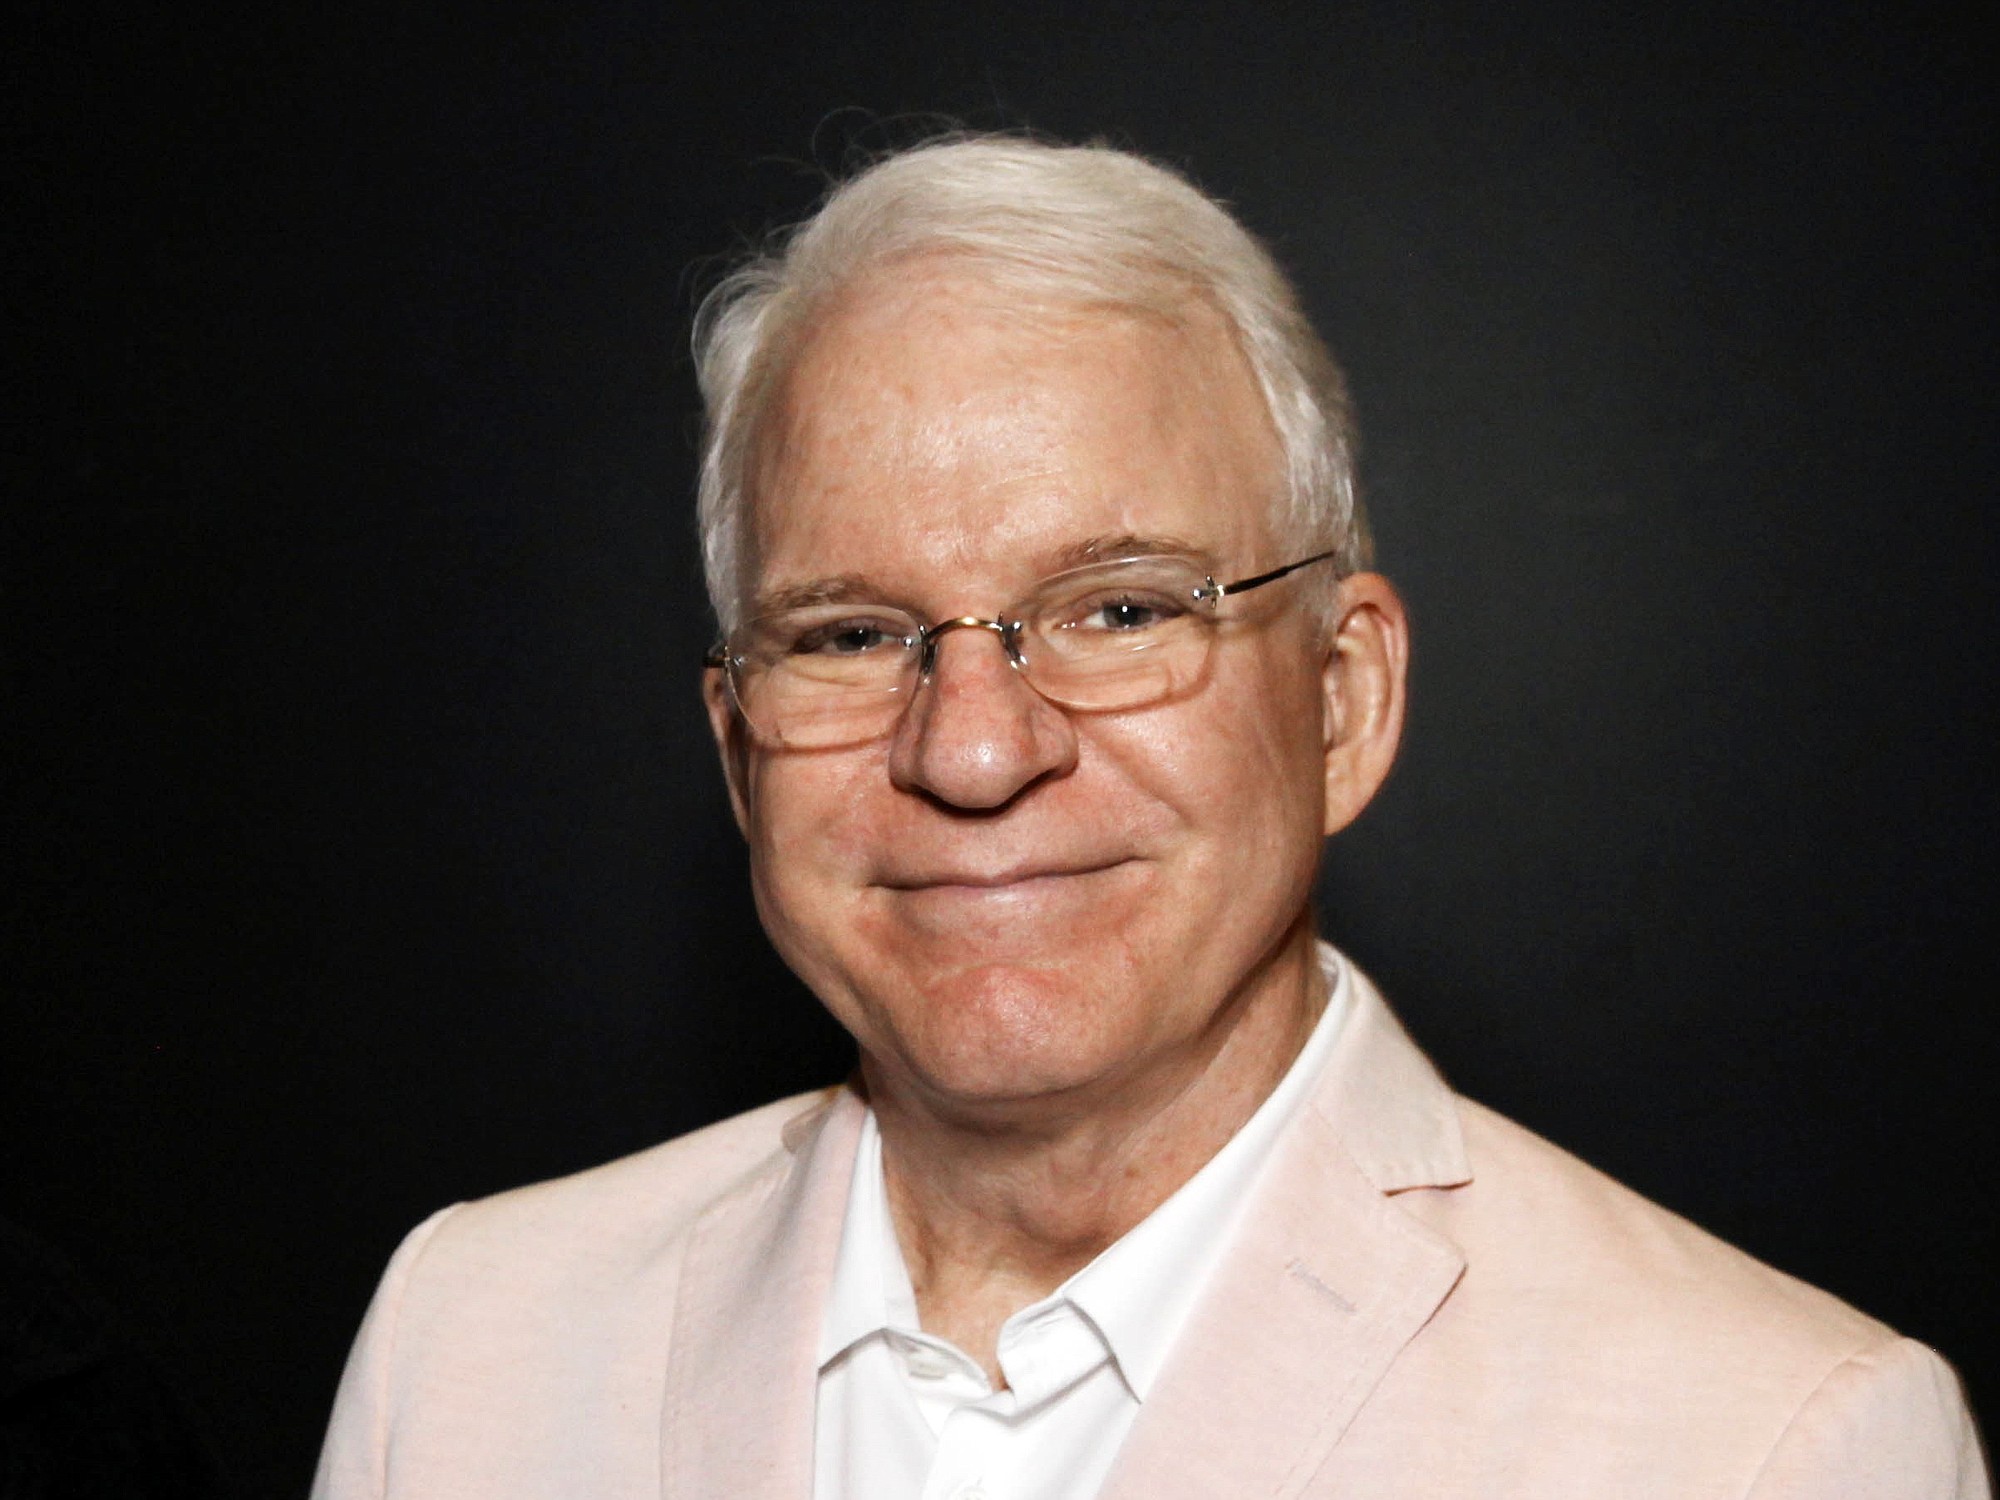 Invision files
TNT will air the American Film Institute tribute to Steve Martin on Saturday. TCM will present an encore on July 30 during an evening of Martin's films.